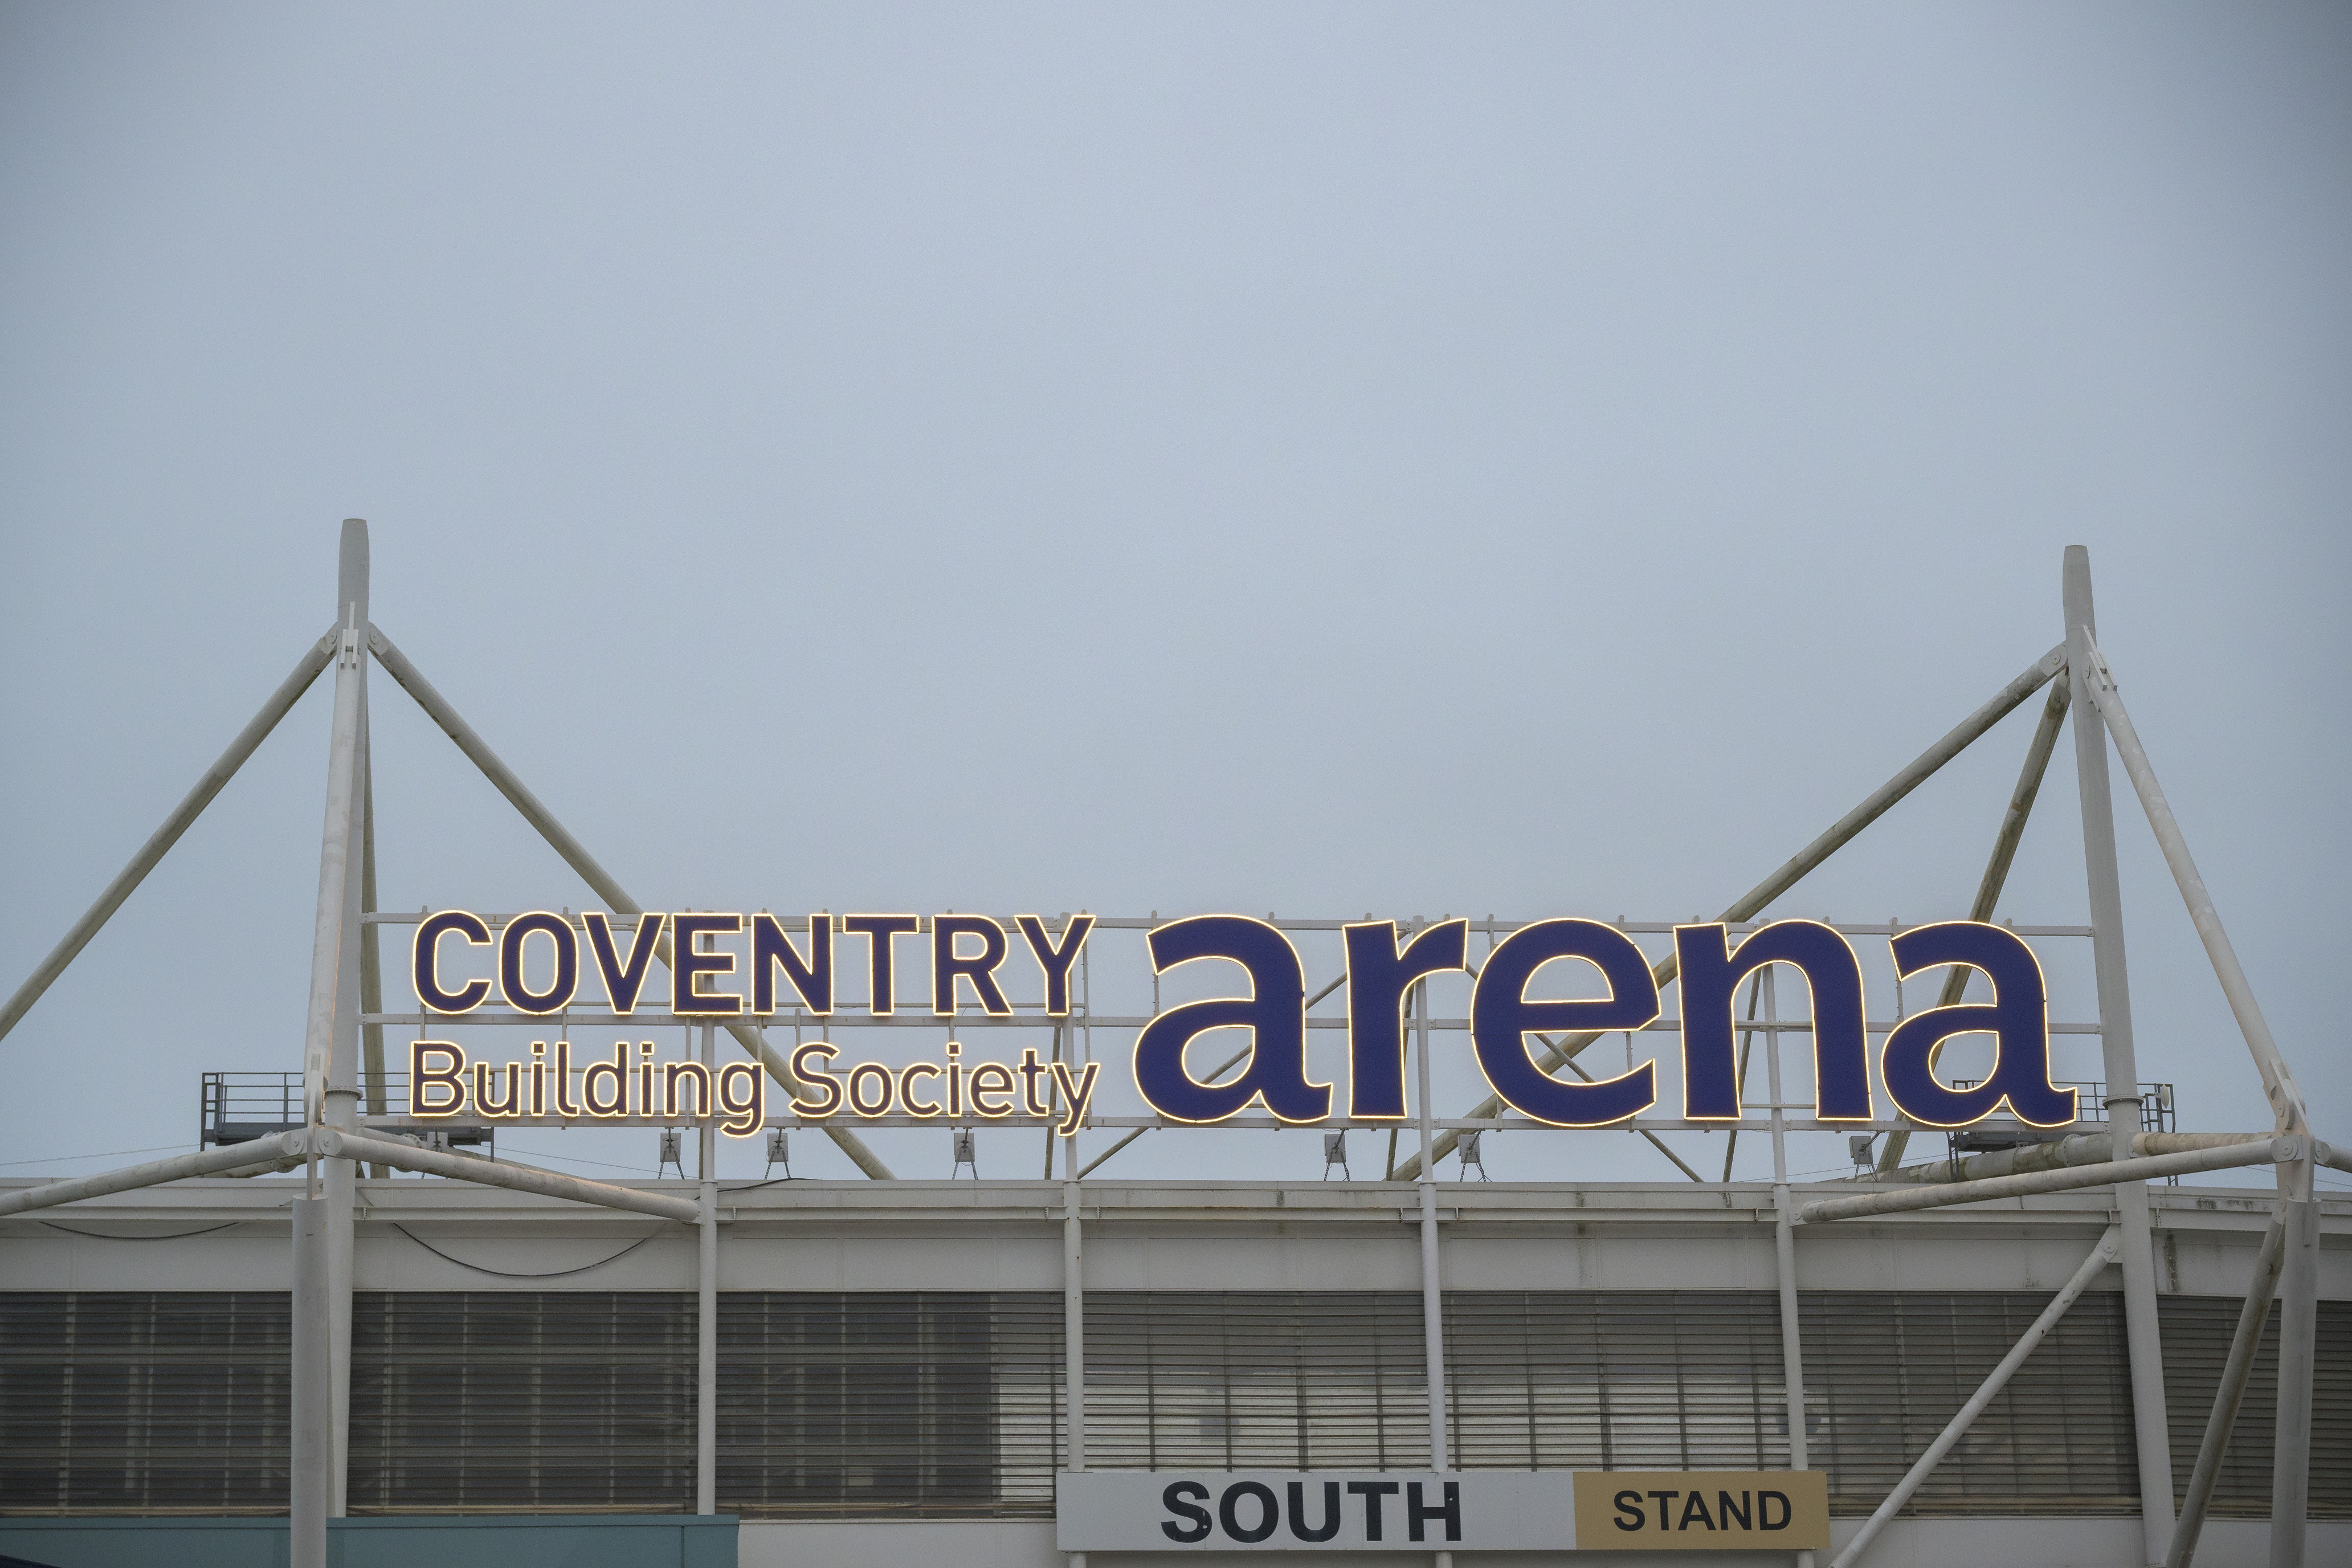 Around 100 jobs available at Coventry Building Society Arena